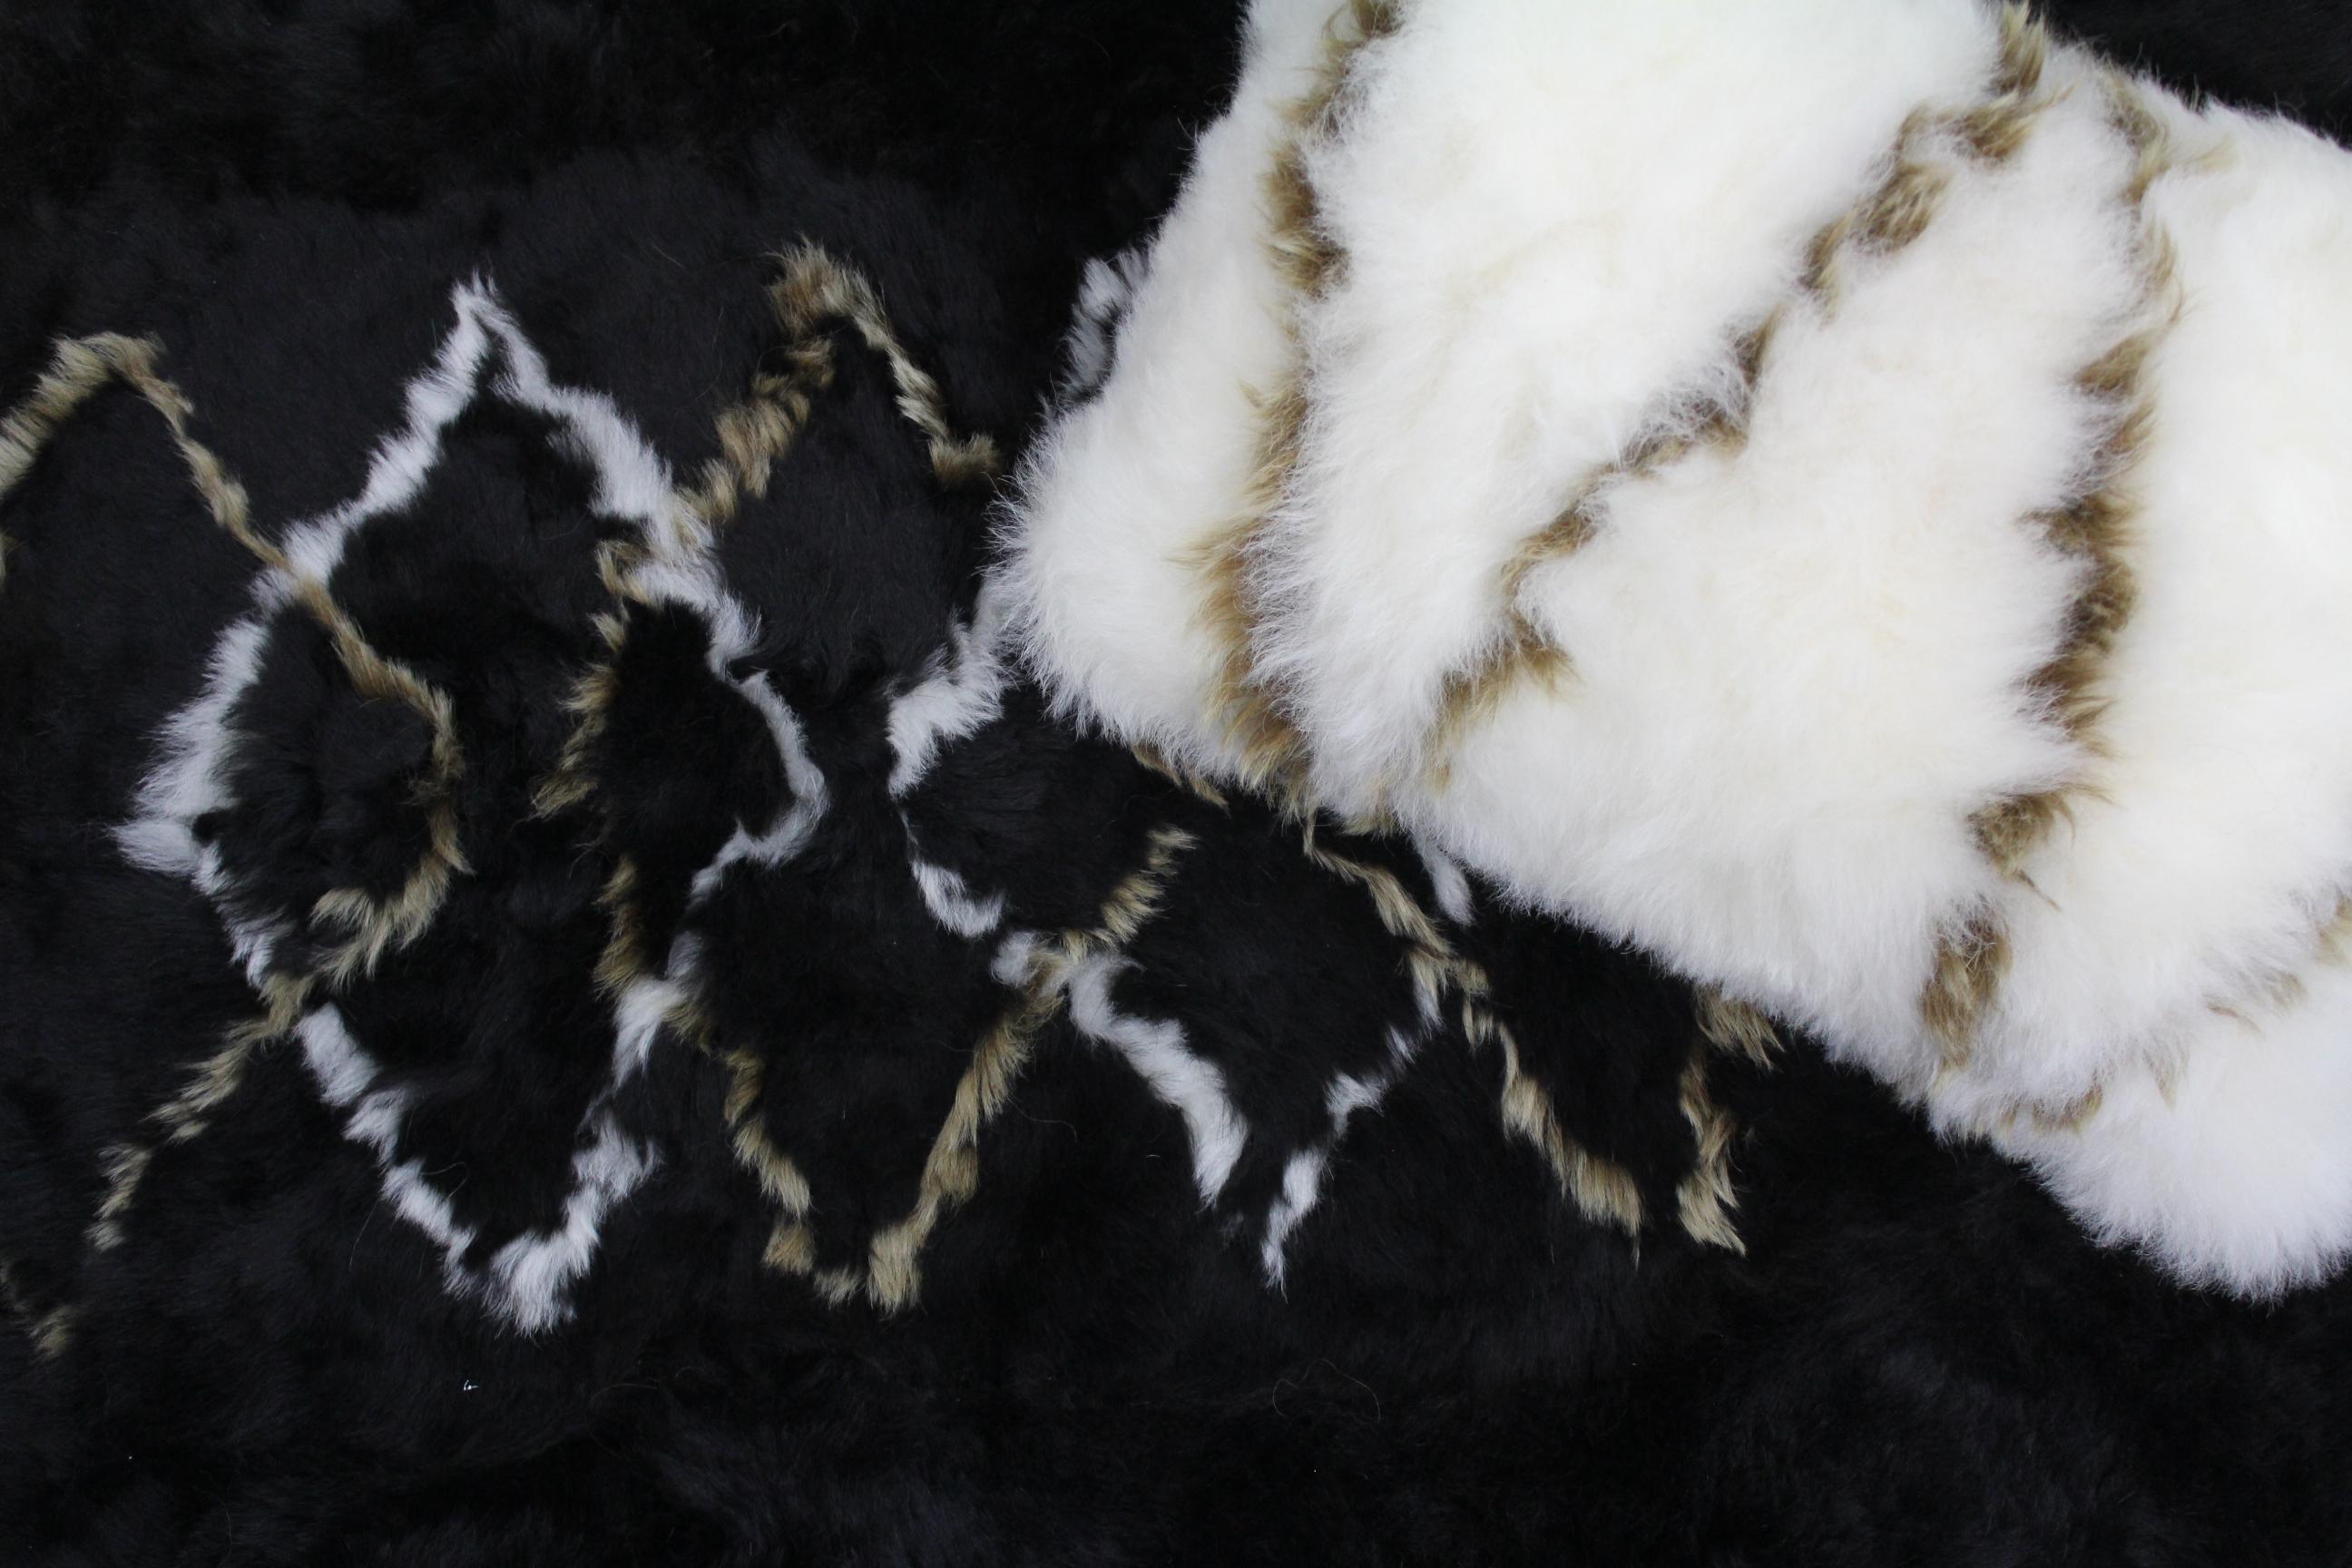 This golden nights, diamond Sheepskin rug is a one of a kind. It is meticulously handcrafted by Australian artisans using intricate patchwork detailing with unparalleled sheepskin craftsmanship and made from the finest, eco-friendly Icelandic